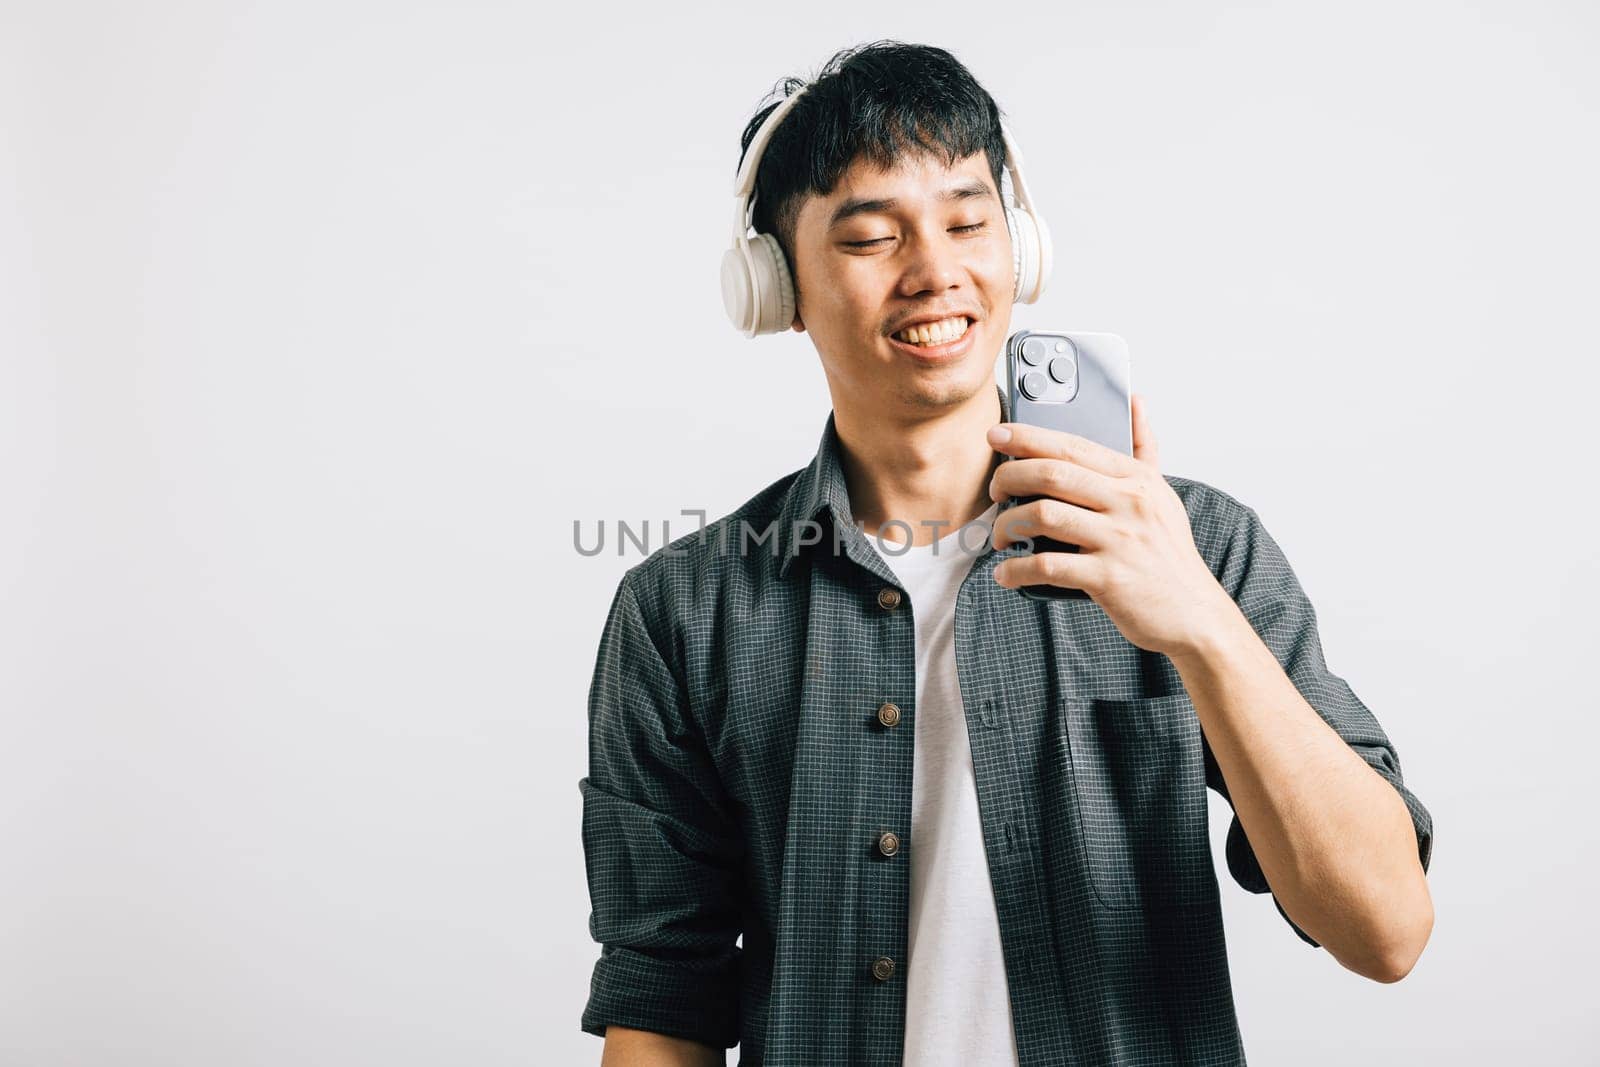 An excited Asian man, with a happy smile, enjoys karaoke on his smartphone using Bluetooth headphones for a wireless experience. Studio shot isolated on white background, capturing his positive vibes.